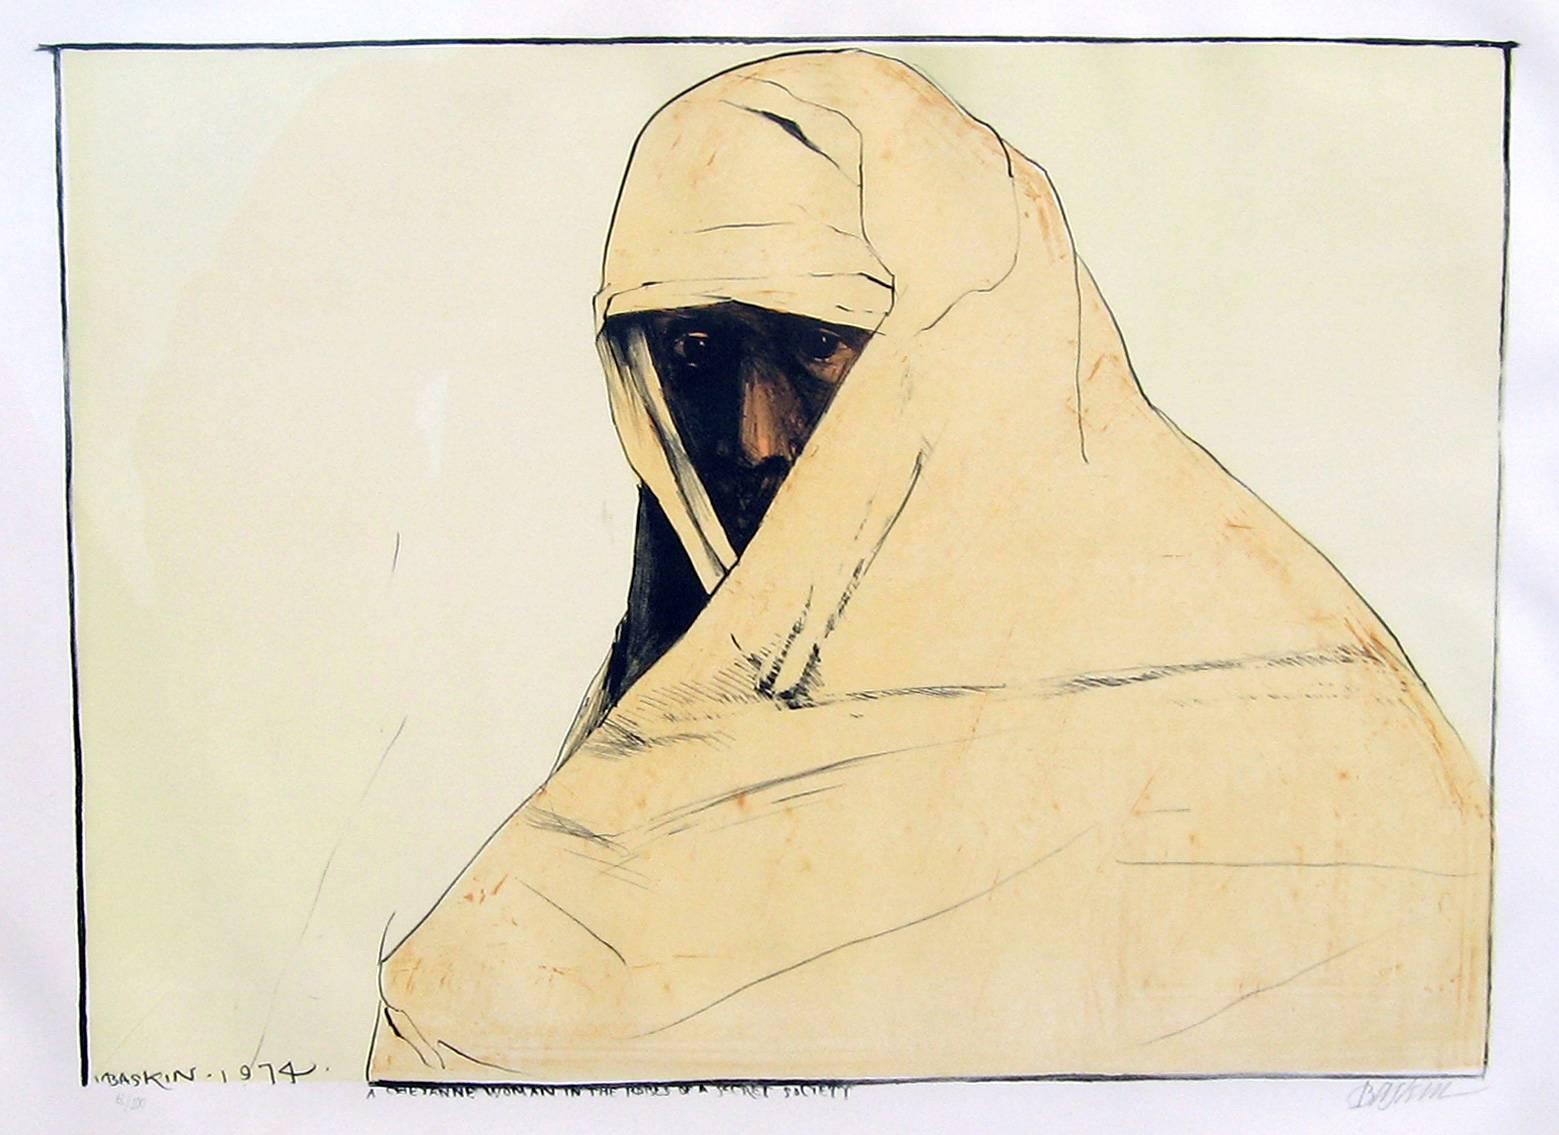 Leonard Baskin Figurative Art - Cheyenne Woman in the Robes of a Secret Society, Lithograph in Colors, American